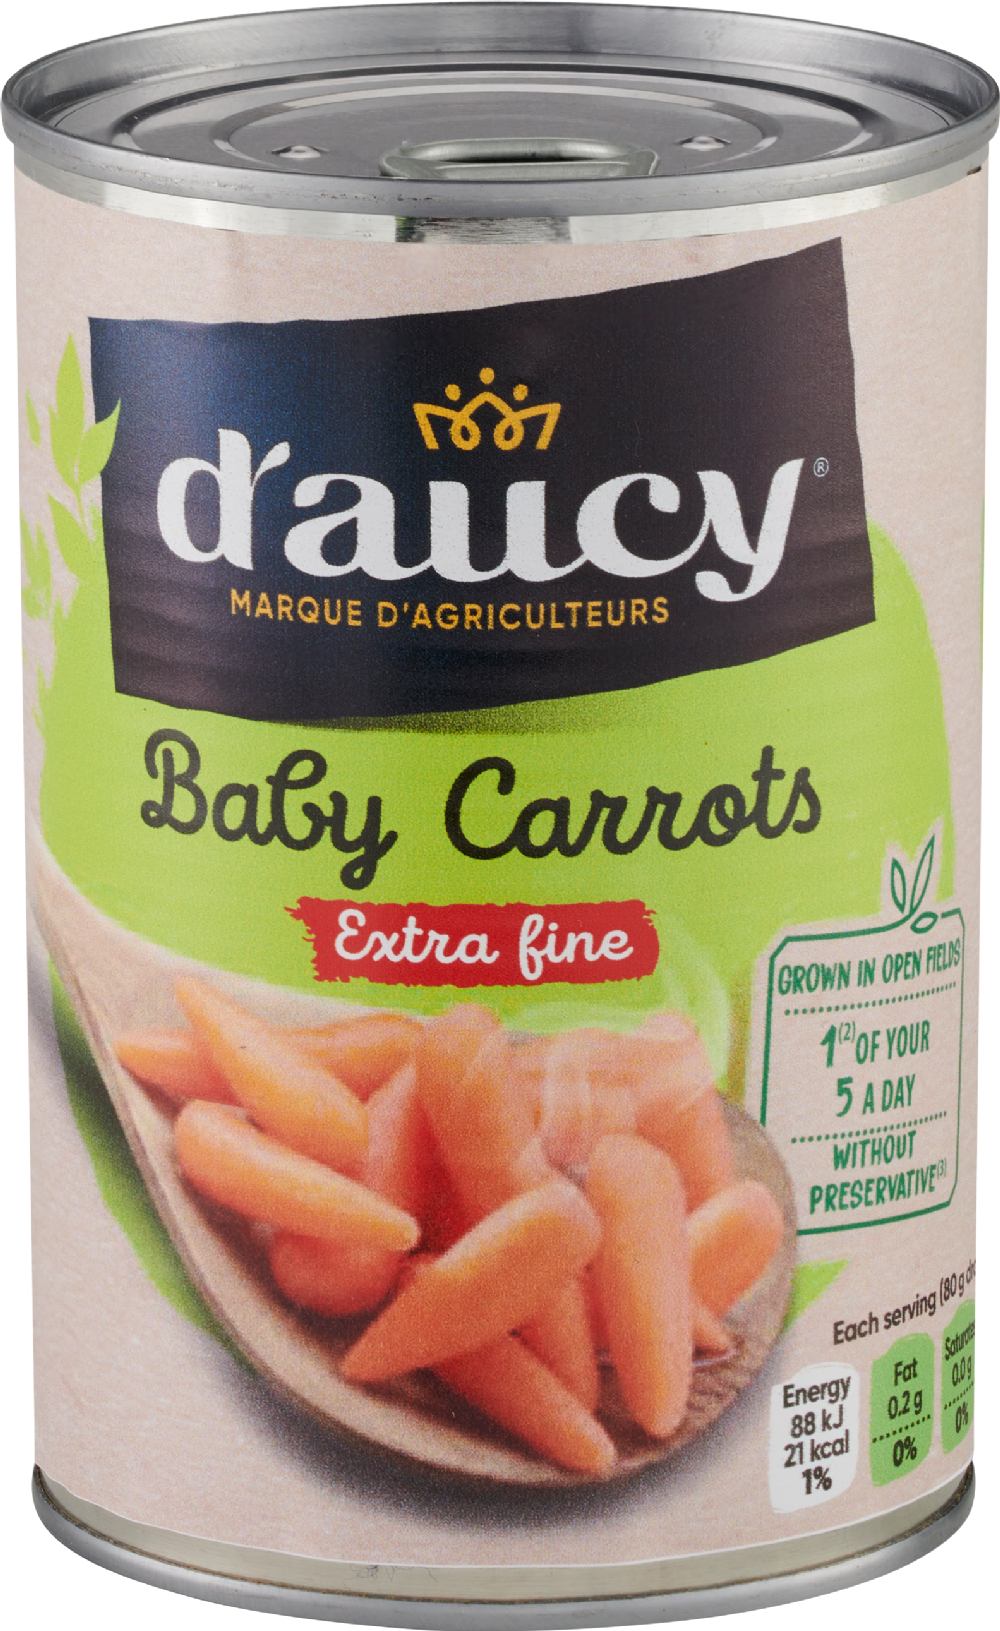 D'AUCY Baby Carrots - Extra Fine 400g